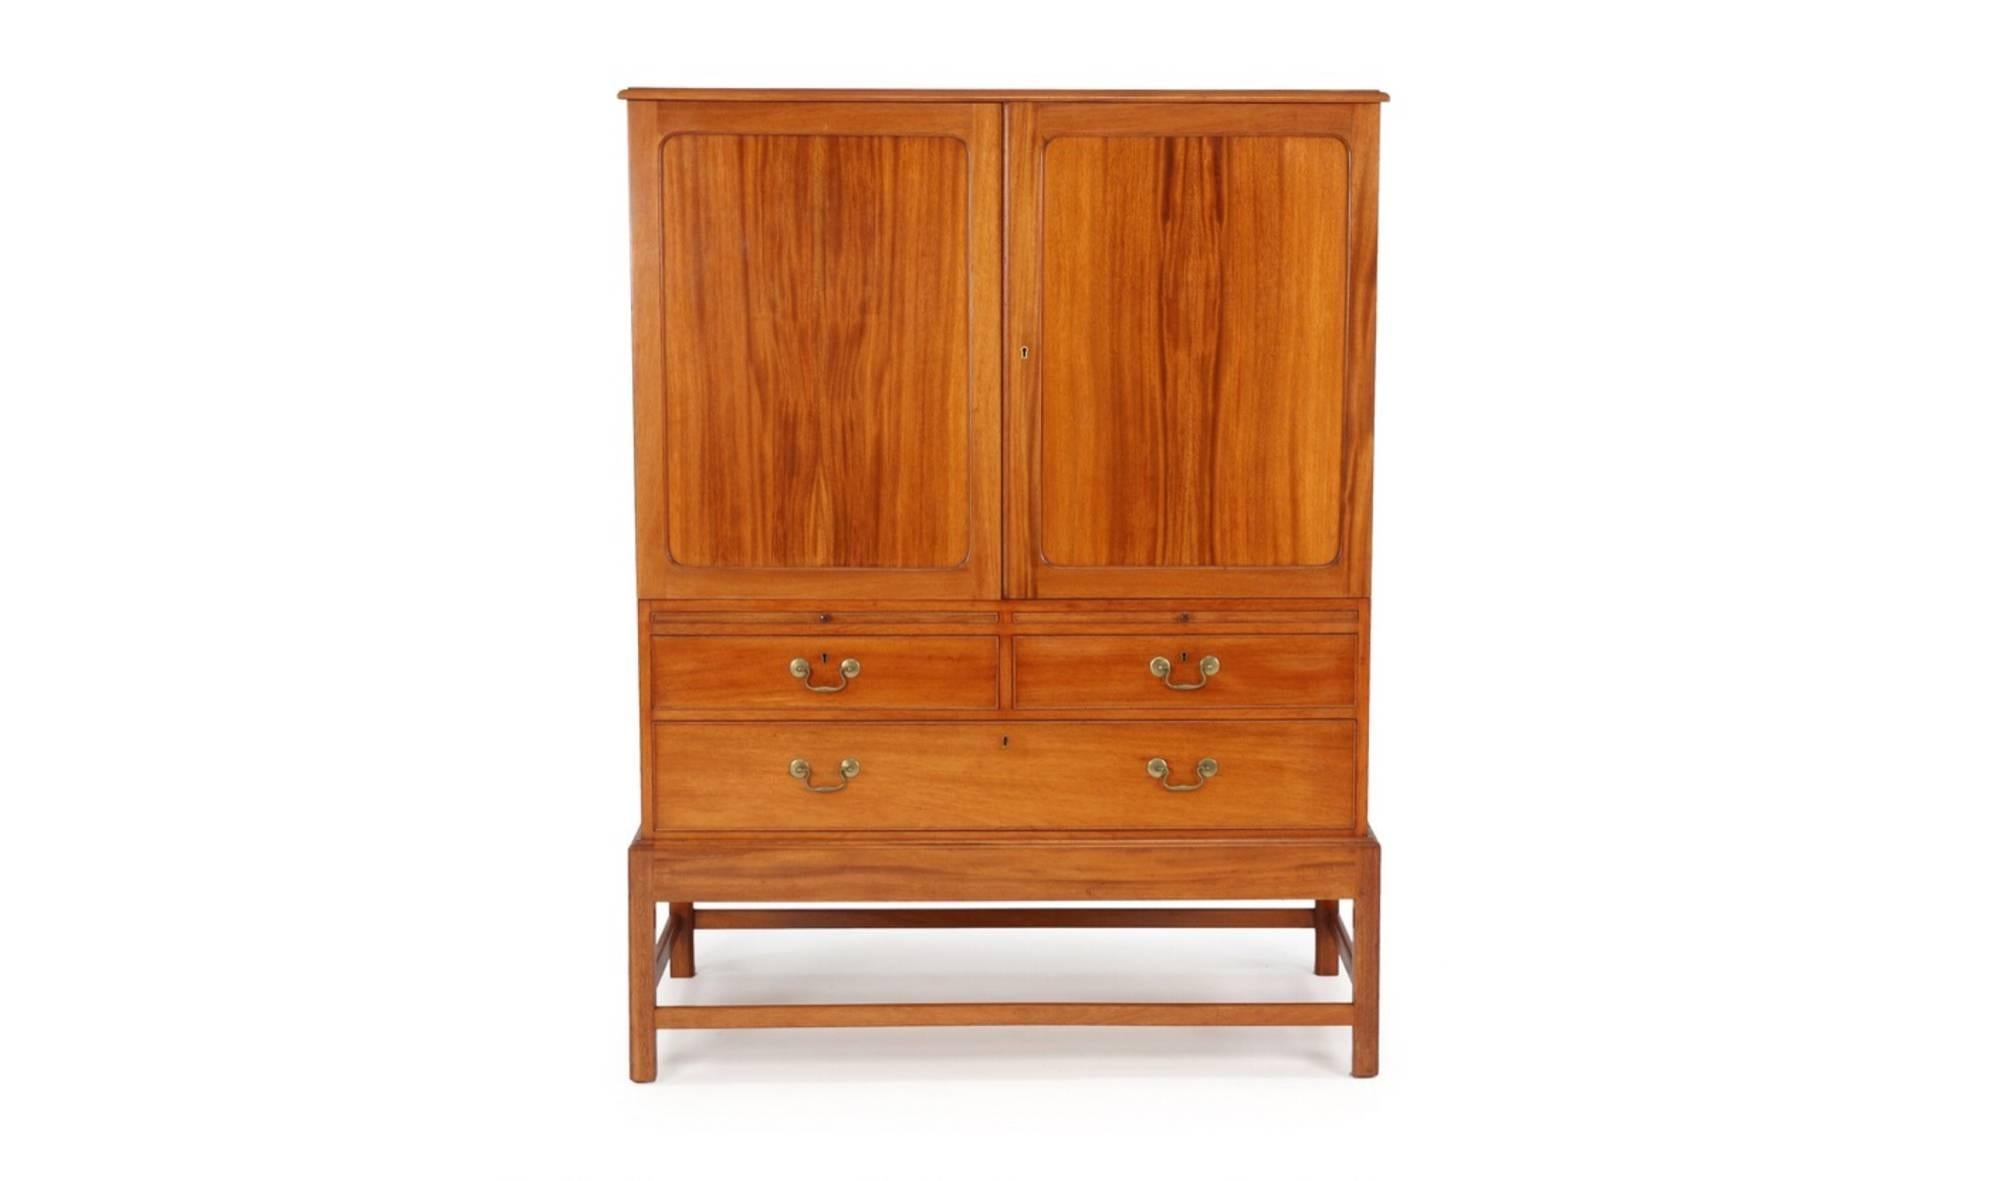 Kaare Klint, Danish midcentury cabinet in mahogany for Rud Rasmussen cabinetmakers, Copenhagen. Cabinet features a pair of doors concealing five pullout shelves over three exposed drawers with brass 'handlebar' pulls.

Signed with decal